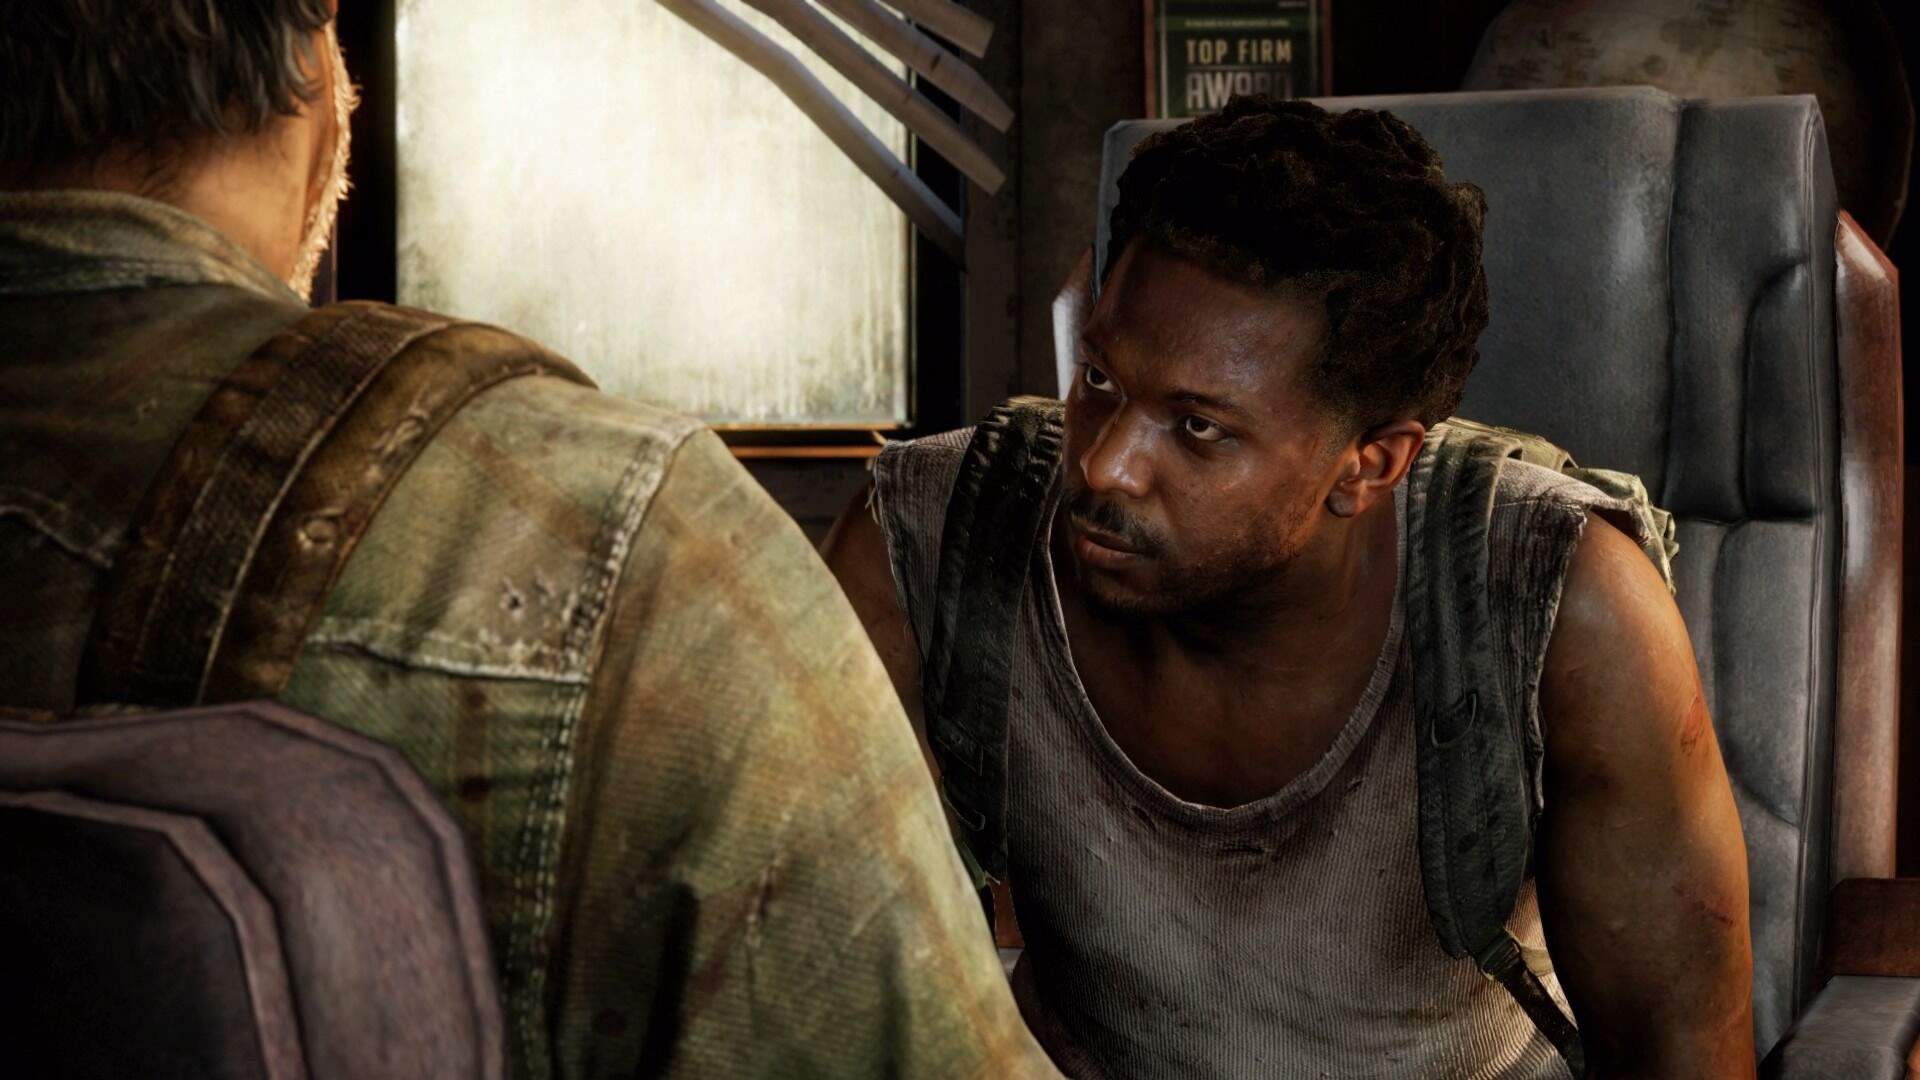 Who Is Henry in 'The Last of Us' and Why Does Kathleen Hate Him? - IMDb